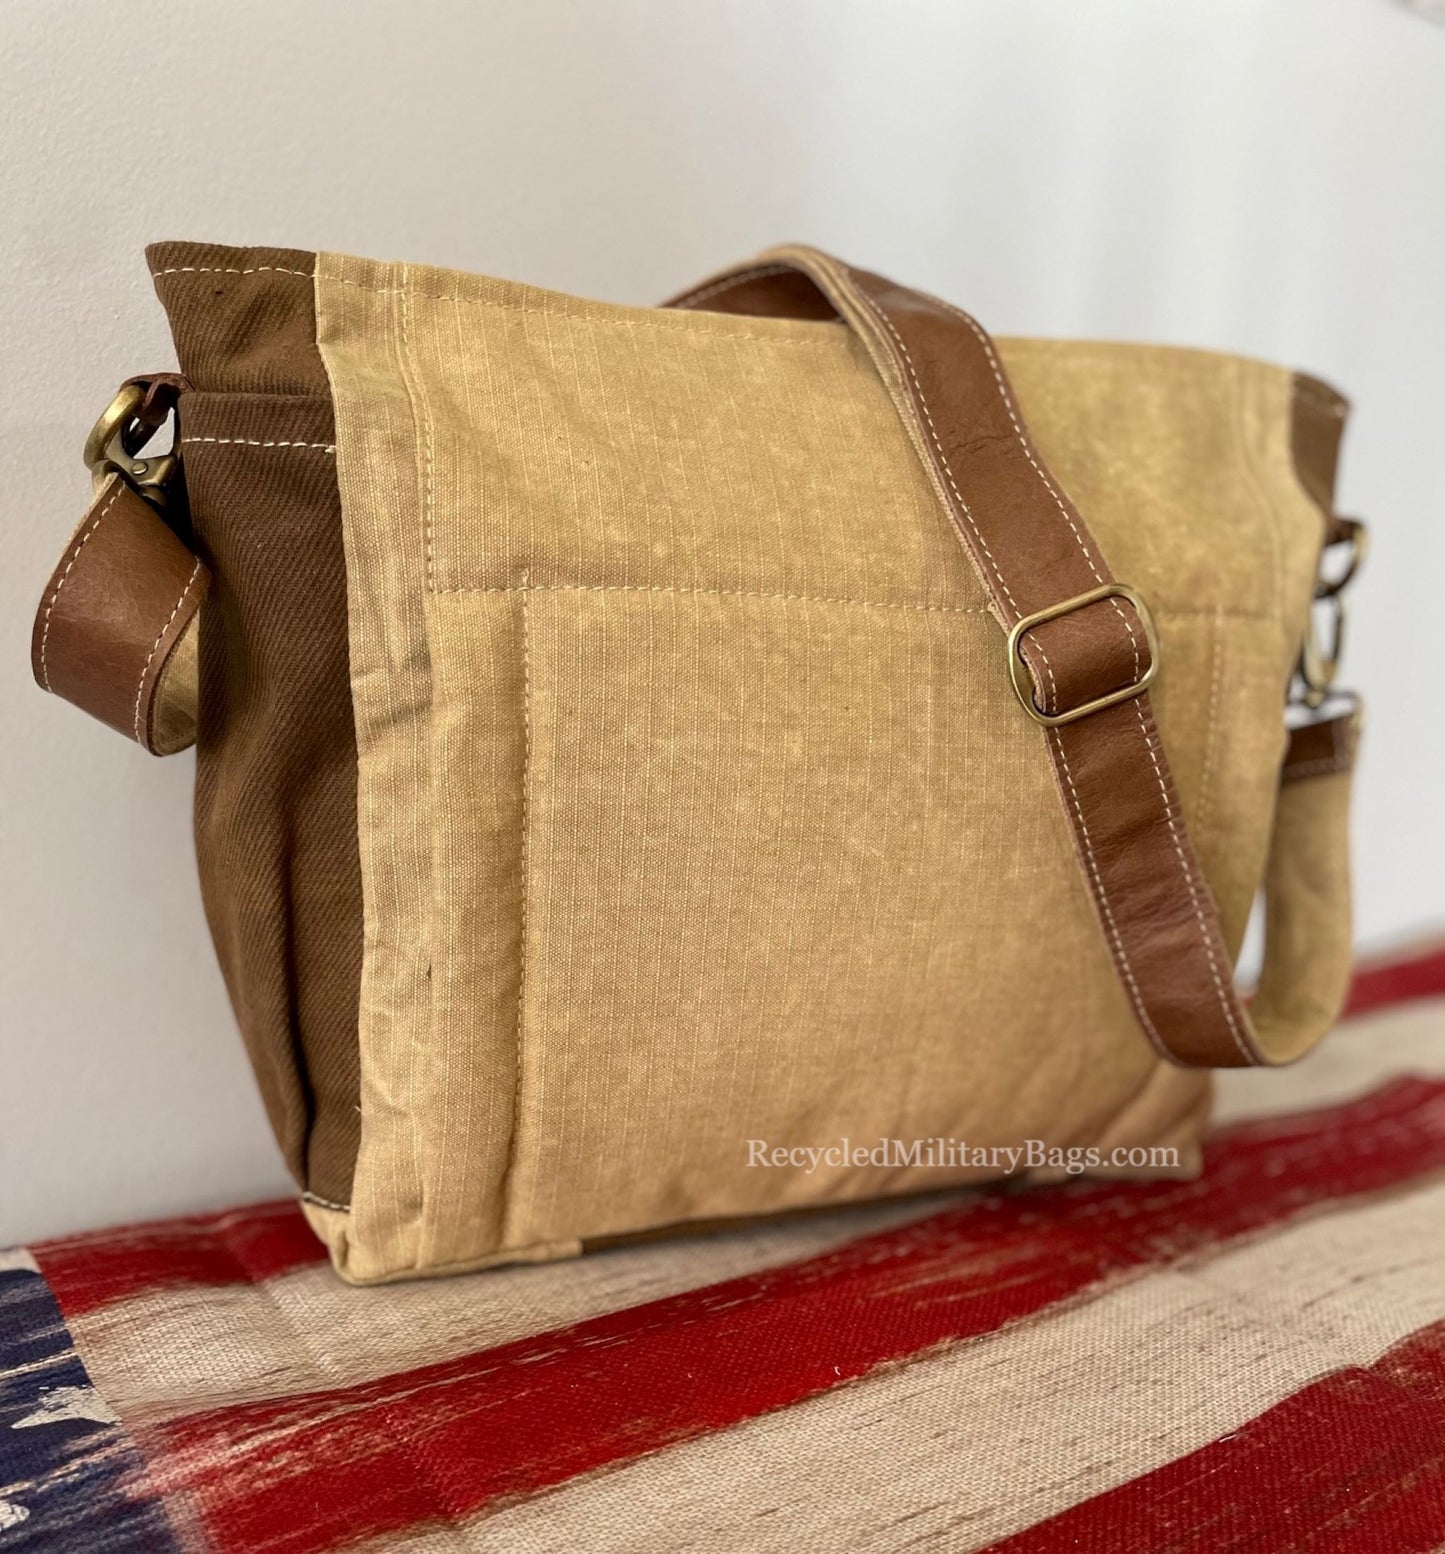 NEW! Conceal Carry Queen Bee Canvas Bag with Padded CCW Compartment